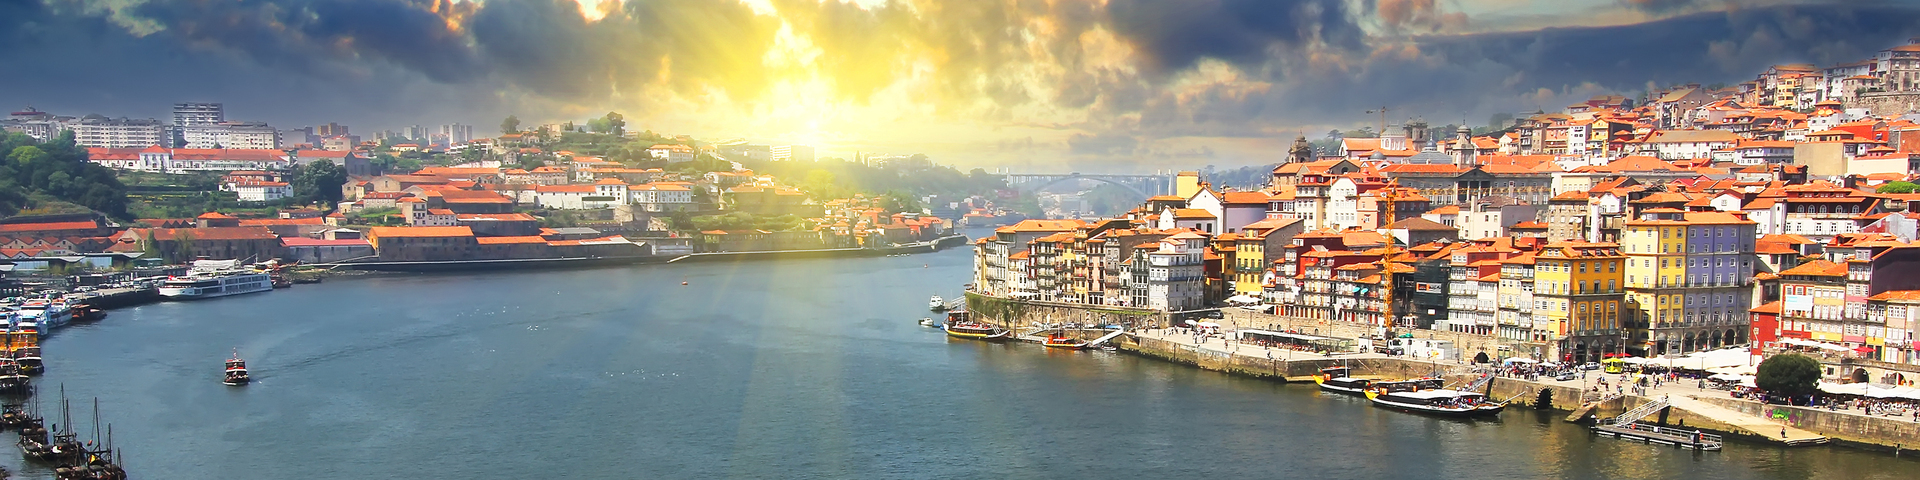 Portugal, Spain & the Douro River Valley